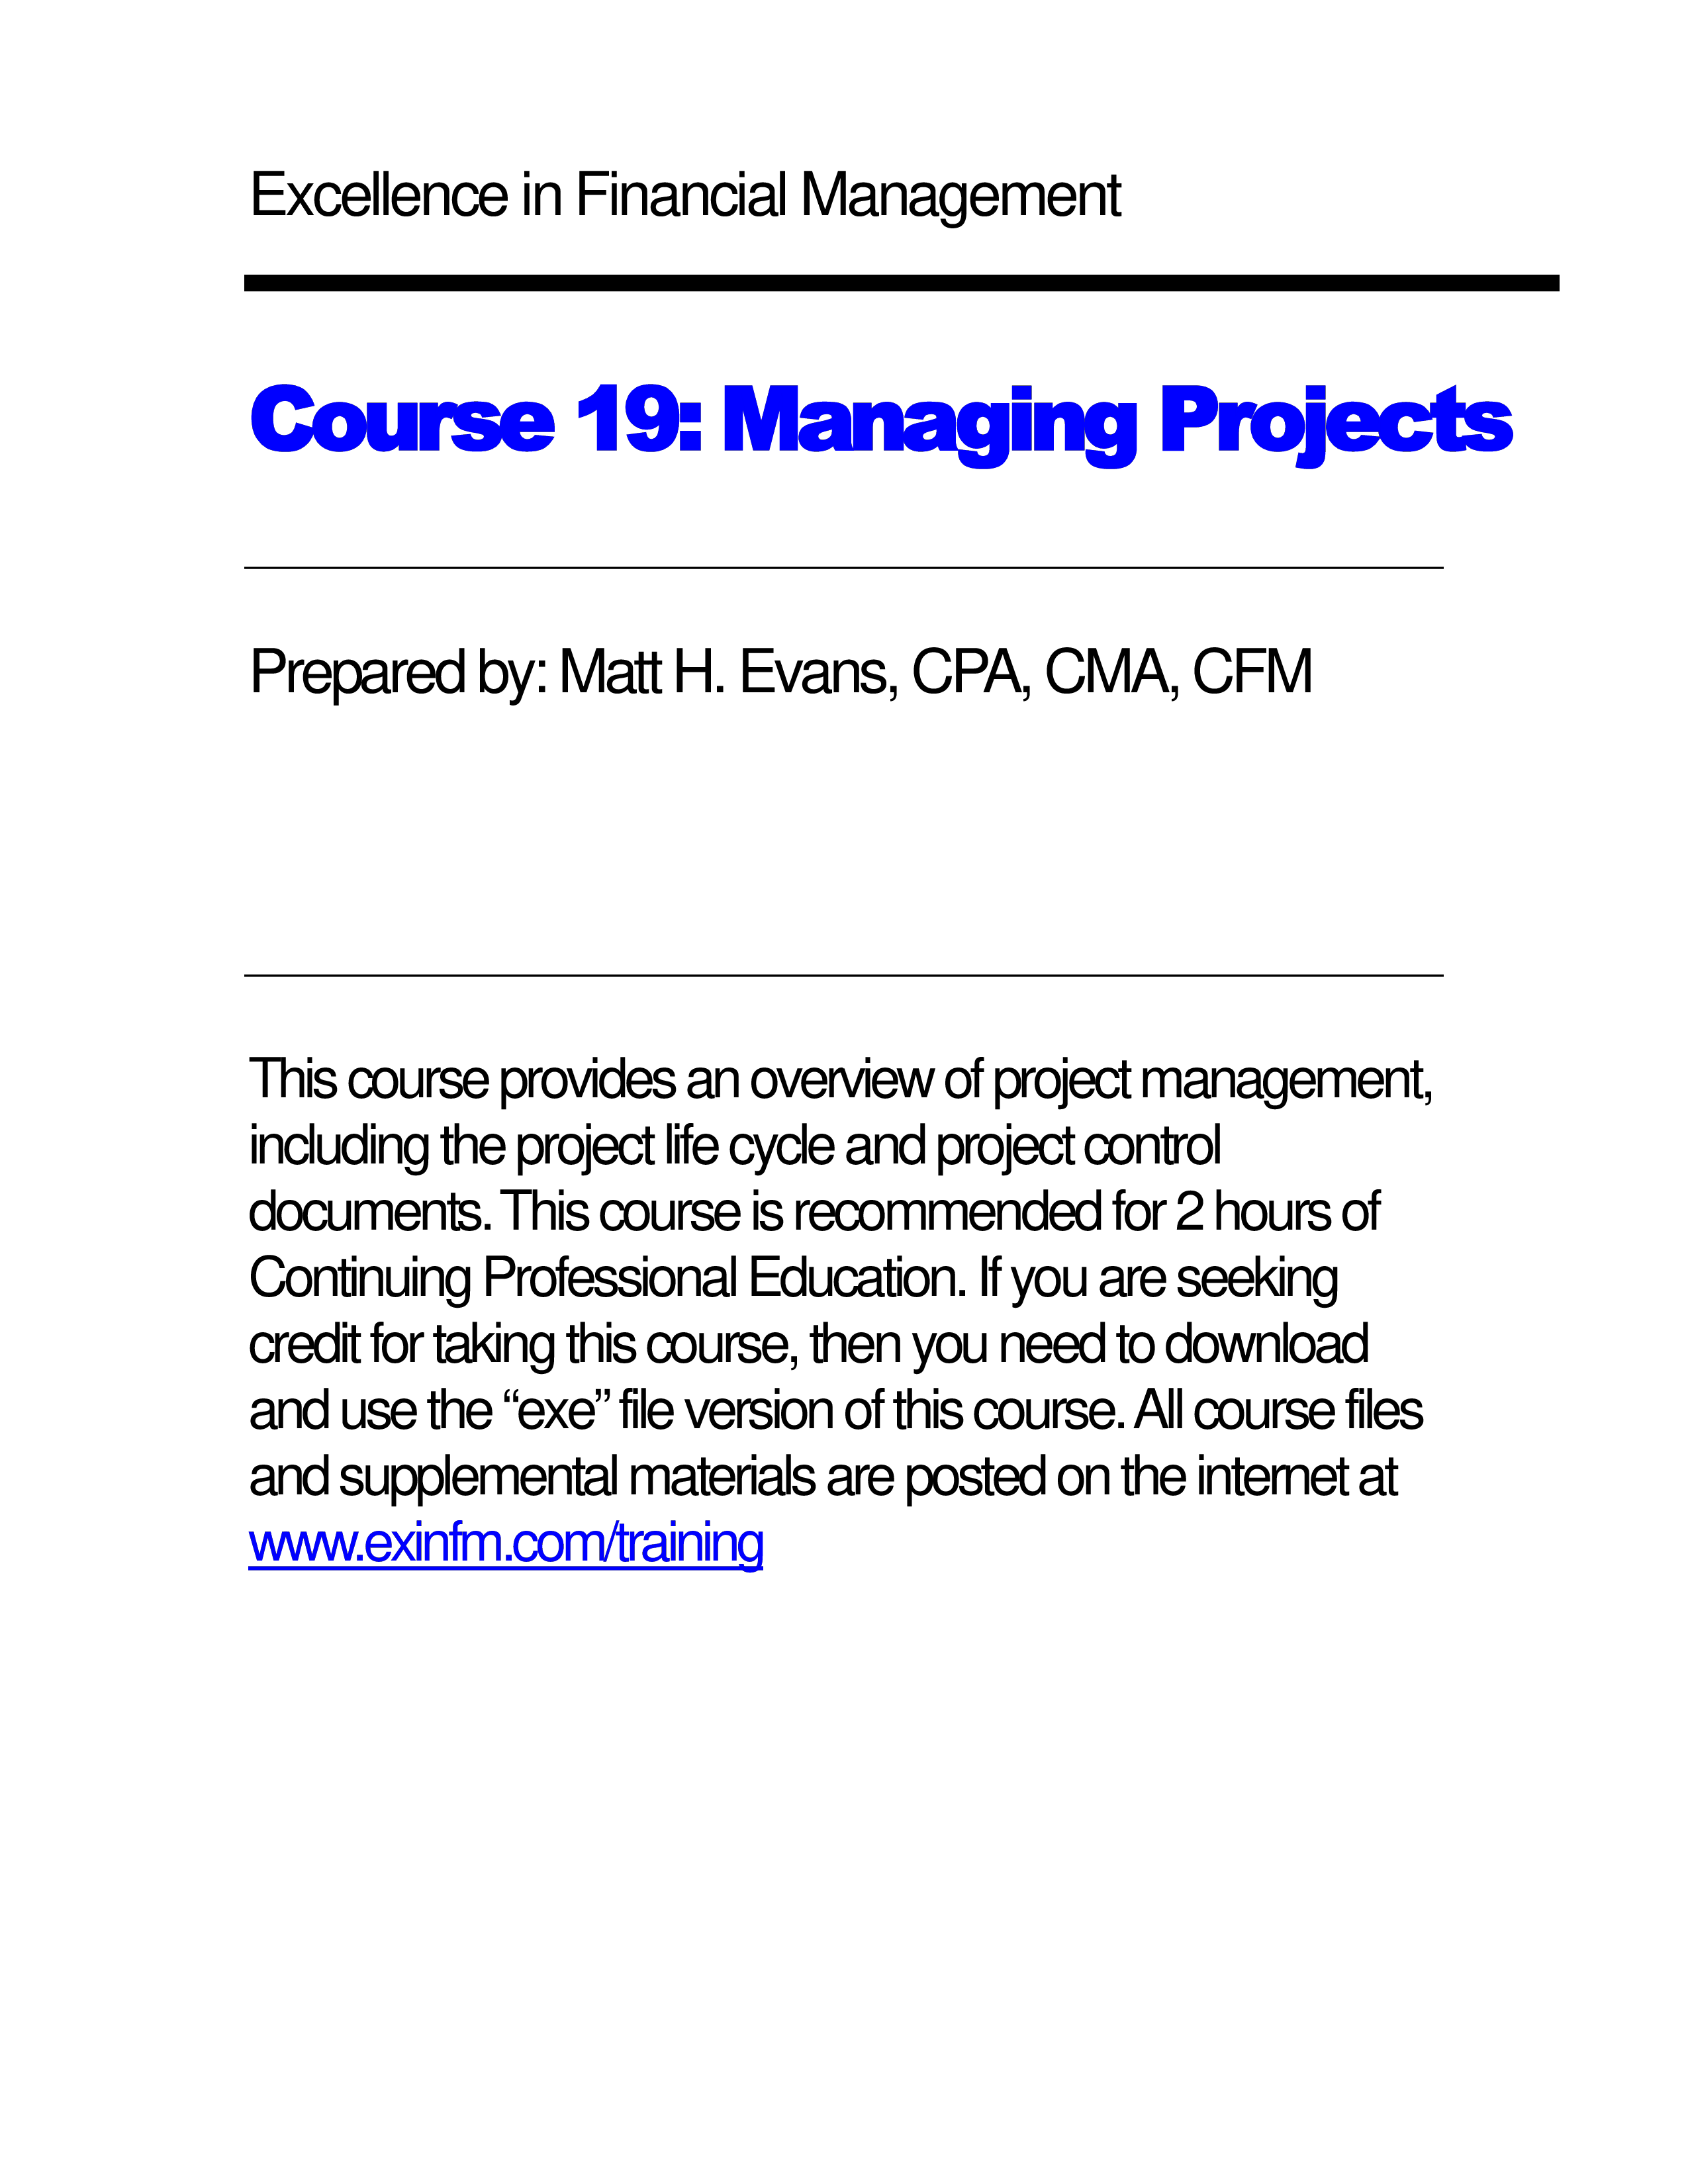 Managing Projects in Financial Management main image